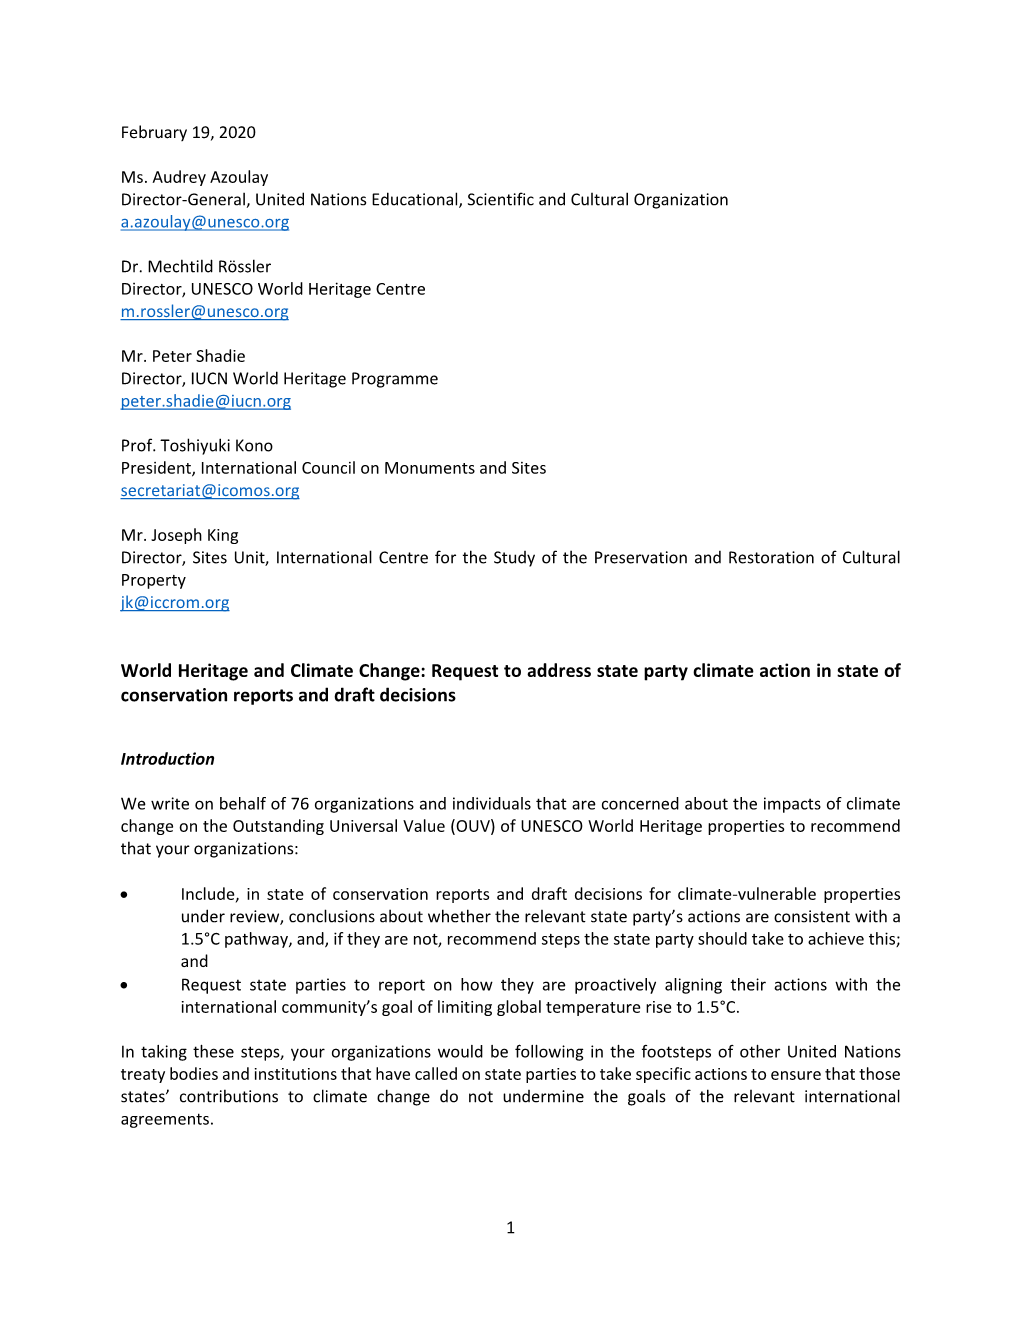 World Heritage and Climate Change: Request to Address State Party Climate Action in State of Conservation Reports and Draft Decisions